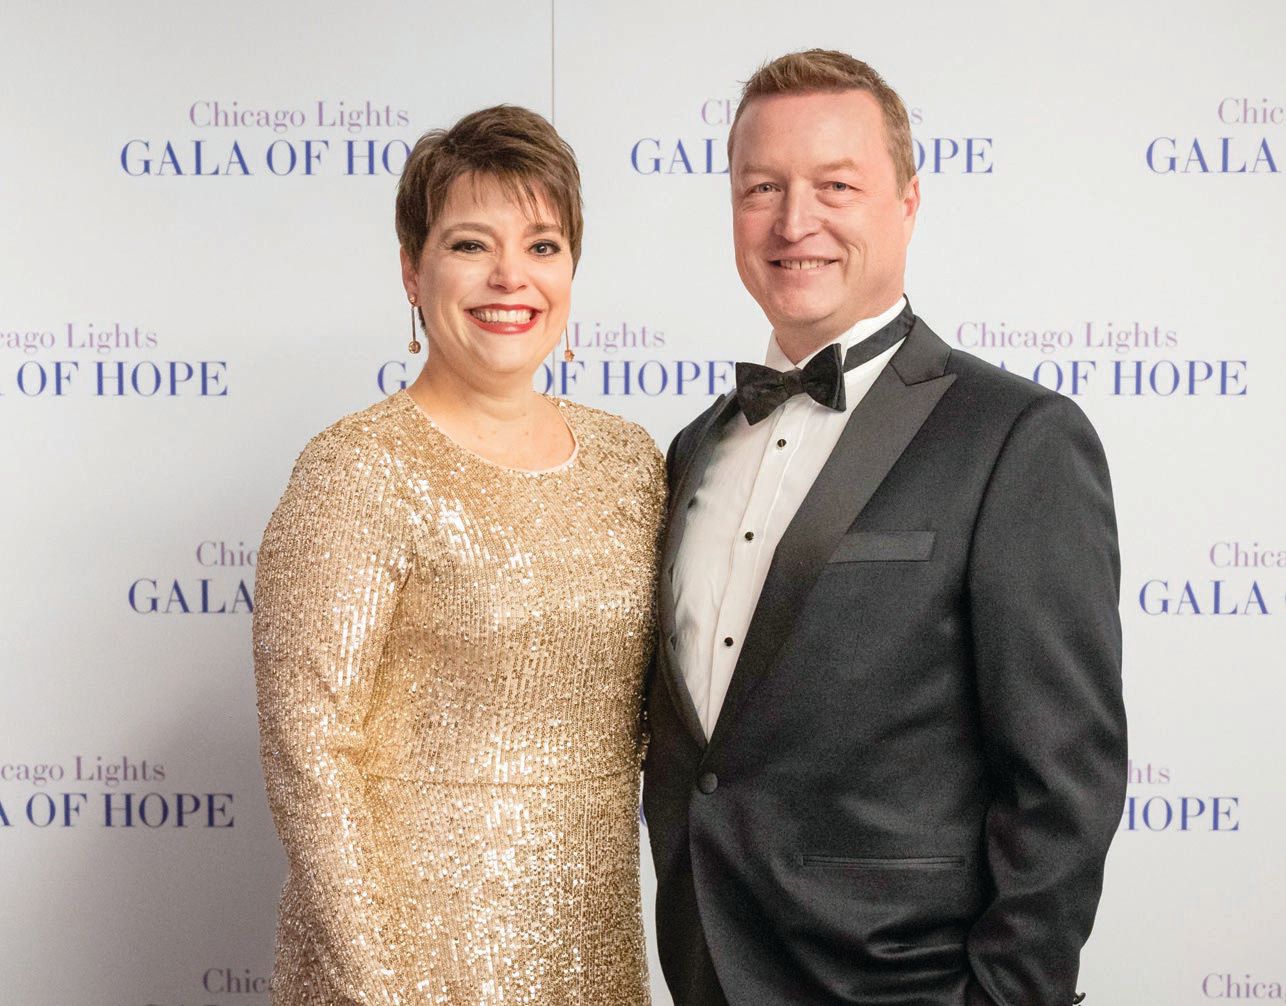 Shannon and Greg Kershner at the Chicago Lights Gala of Hope 2022 PHOTO COURTESY OF CHICAGO LIGHTS